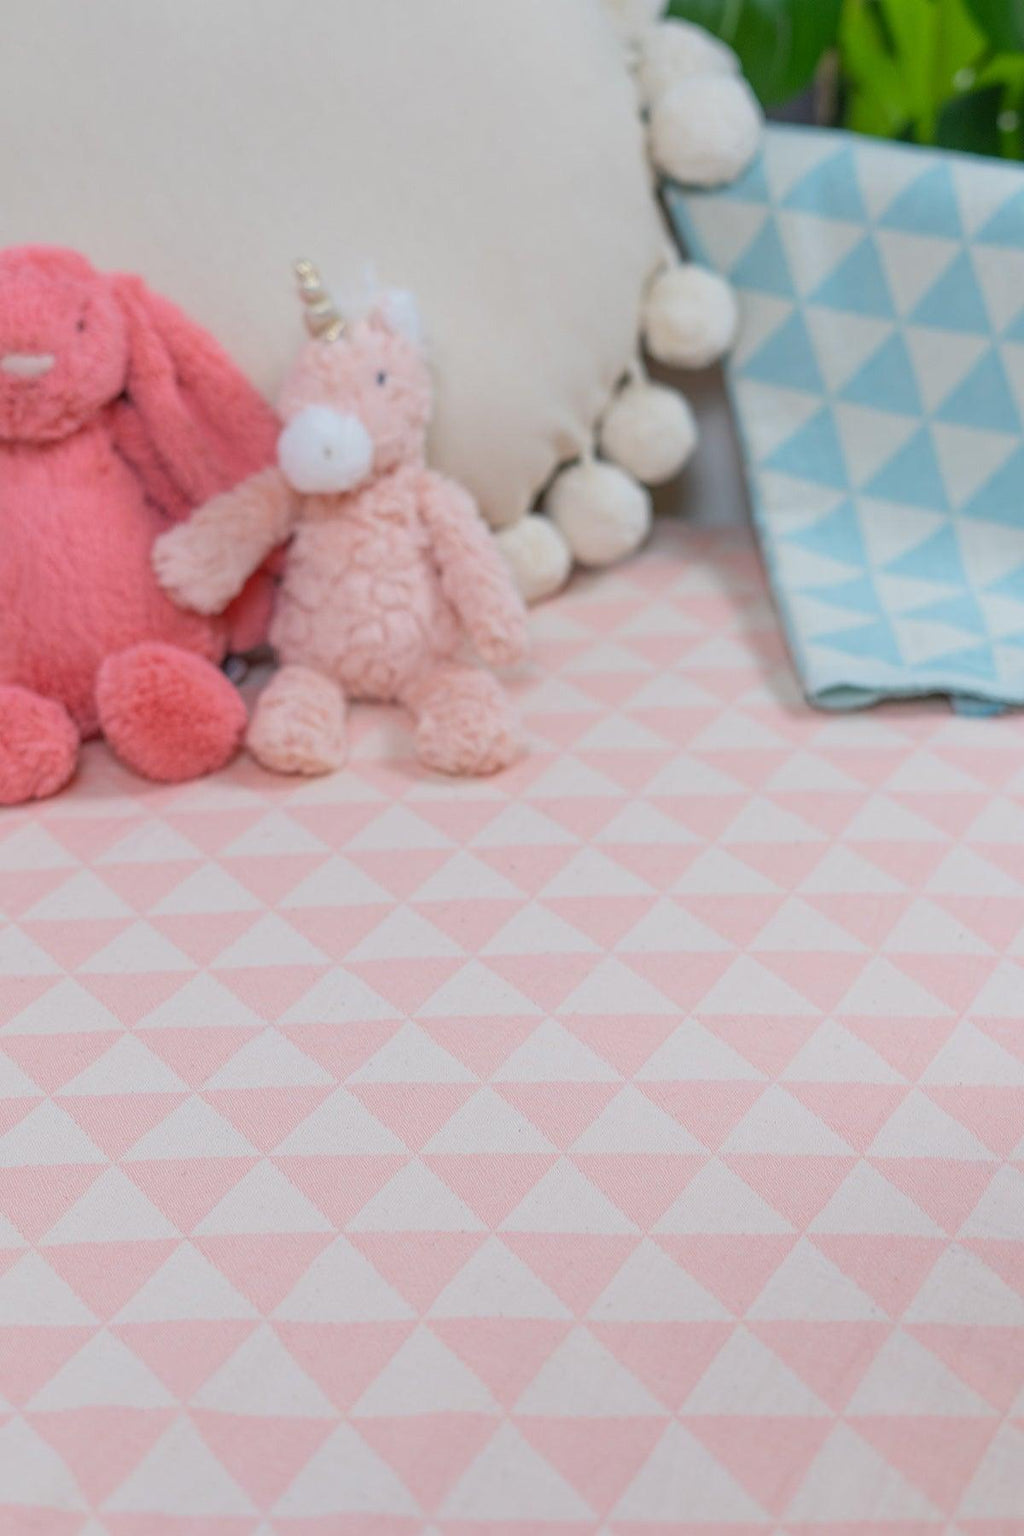 100% Turkish Cotton Pink Triangles Baby Blanket  Size  80 cm x 90 cm  Product Details  Crafted from the finest Turkish Cotton, our stylish, pink cloud patterned baby blankets can be used in many ways. They can be used as a blanket in the crib or in the stroller.